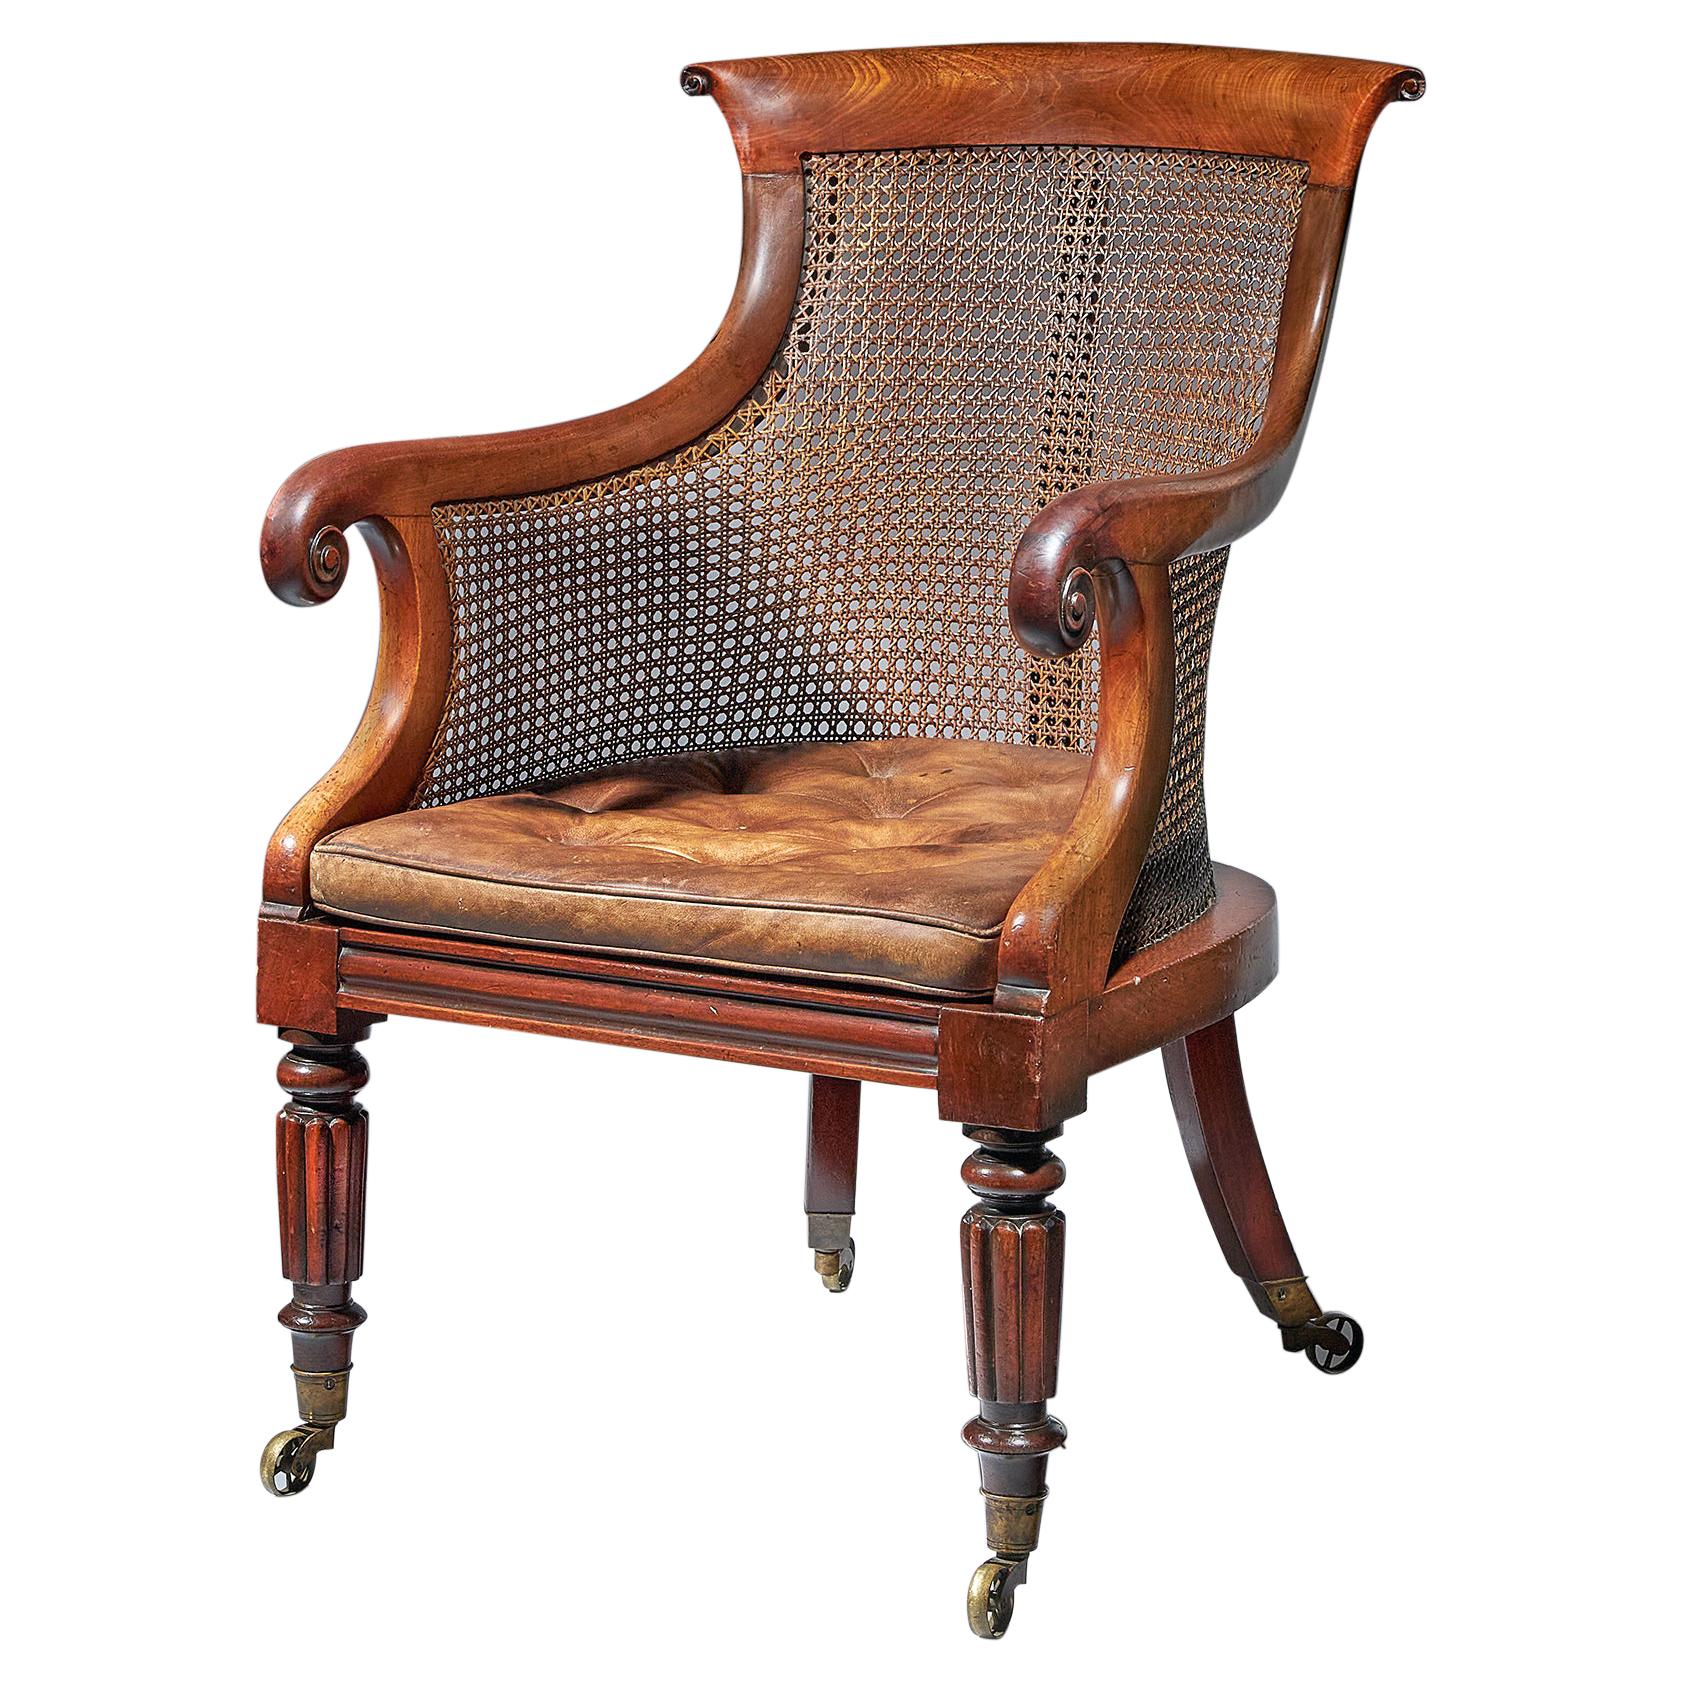 Early William IV Mahogany Bergère Armchair of Large Scale with Original Leather